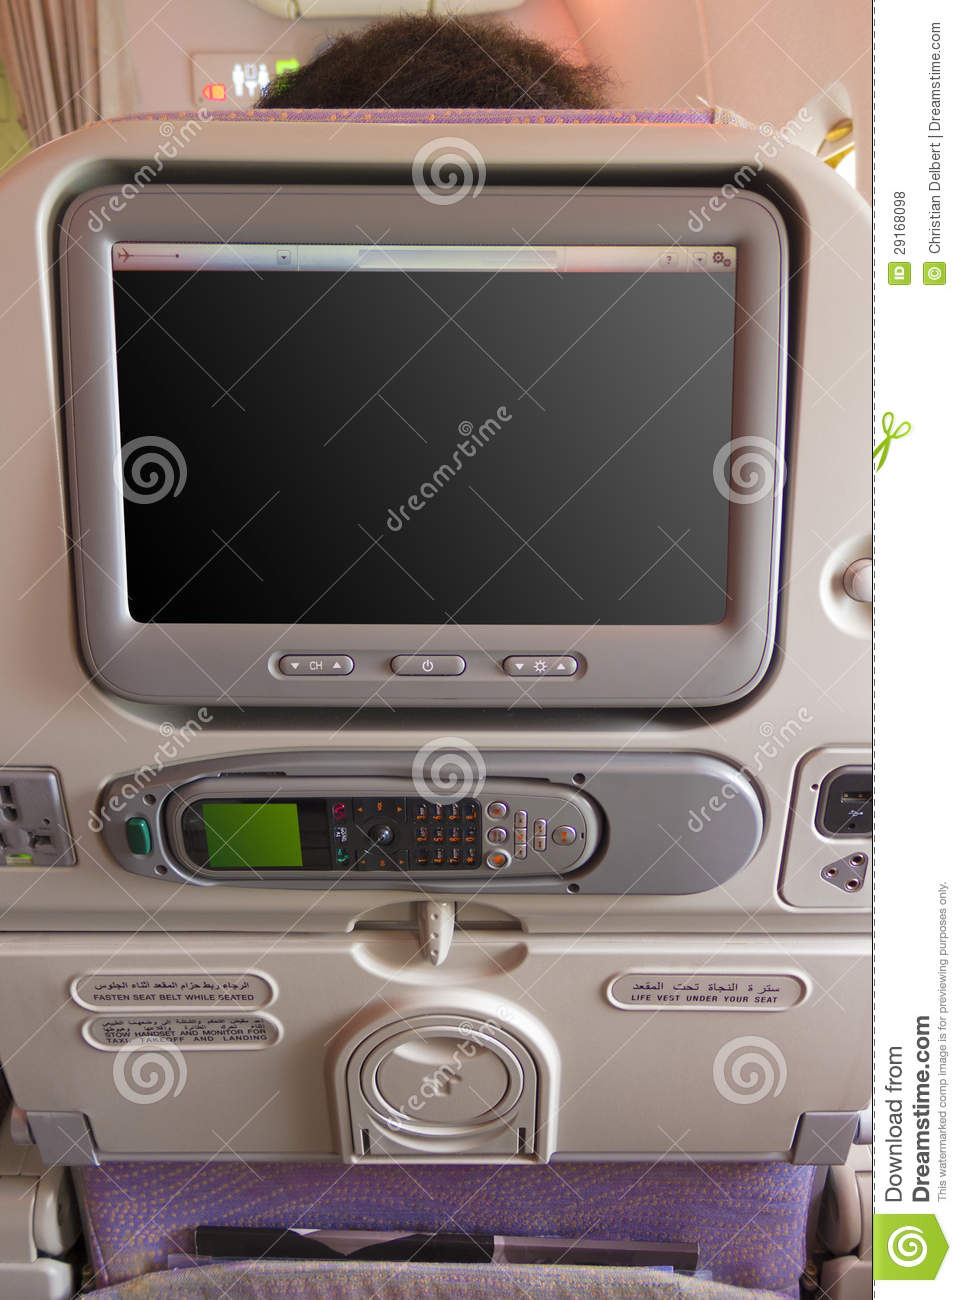 Airline Seat Back Royalty Free Stock Photos   Image  29168098